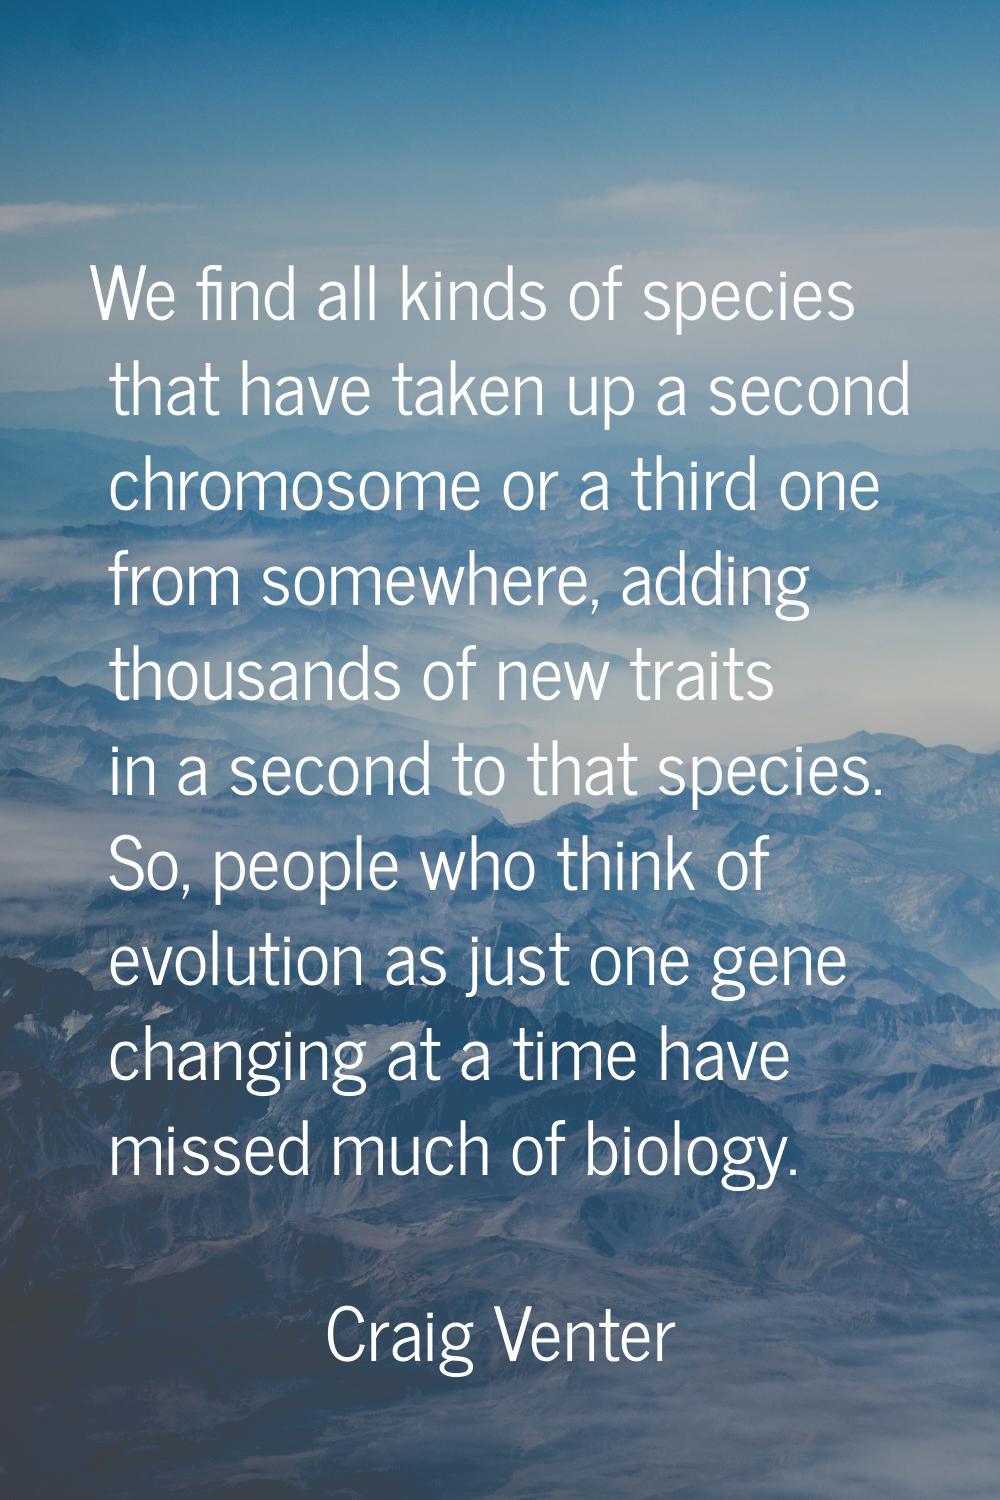 We find all kinds of species that have taken up a second chromosome or a third one from somewhere, 